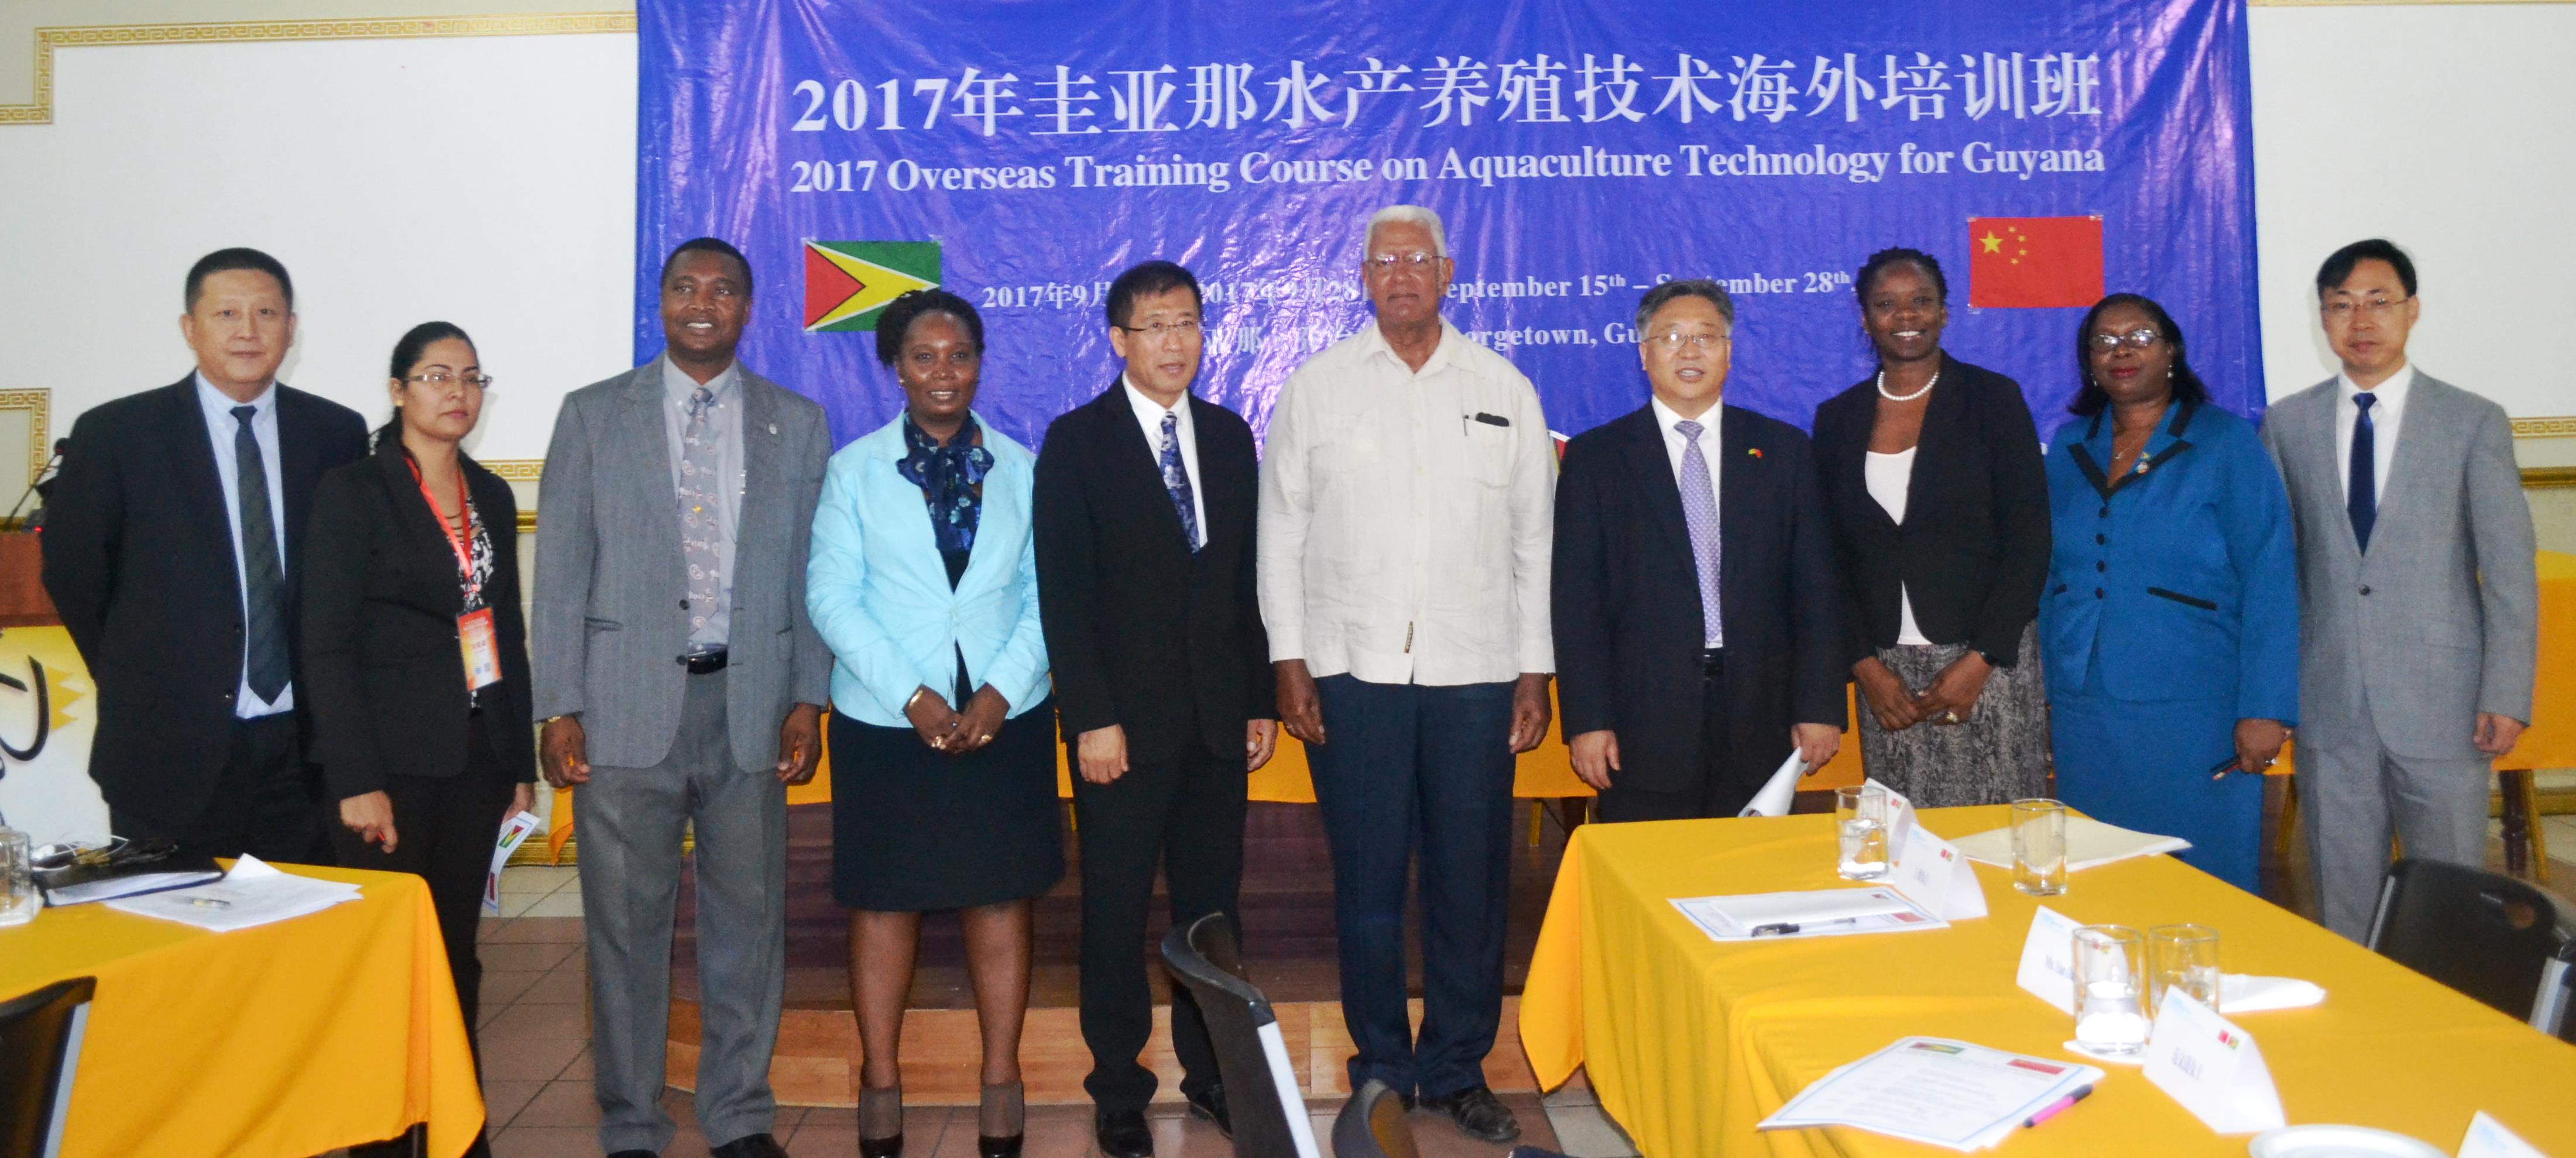 Minister Holder, Ambassador Cui Jianchun and other representatives of the Ministry of Agriculture and the Chinese Government